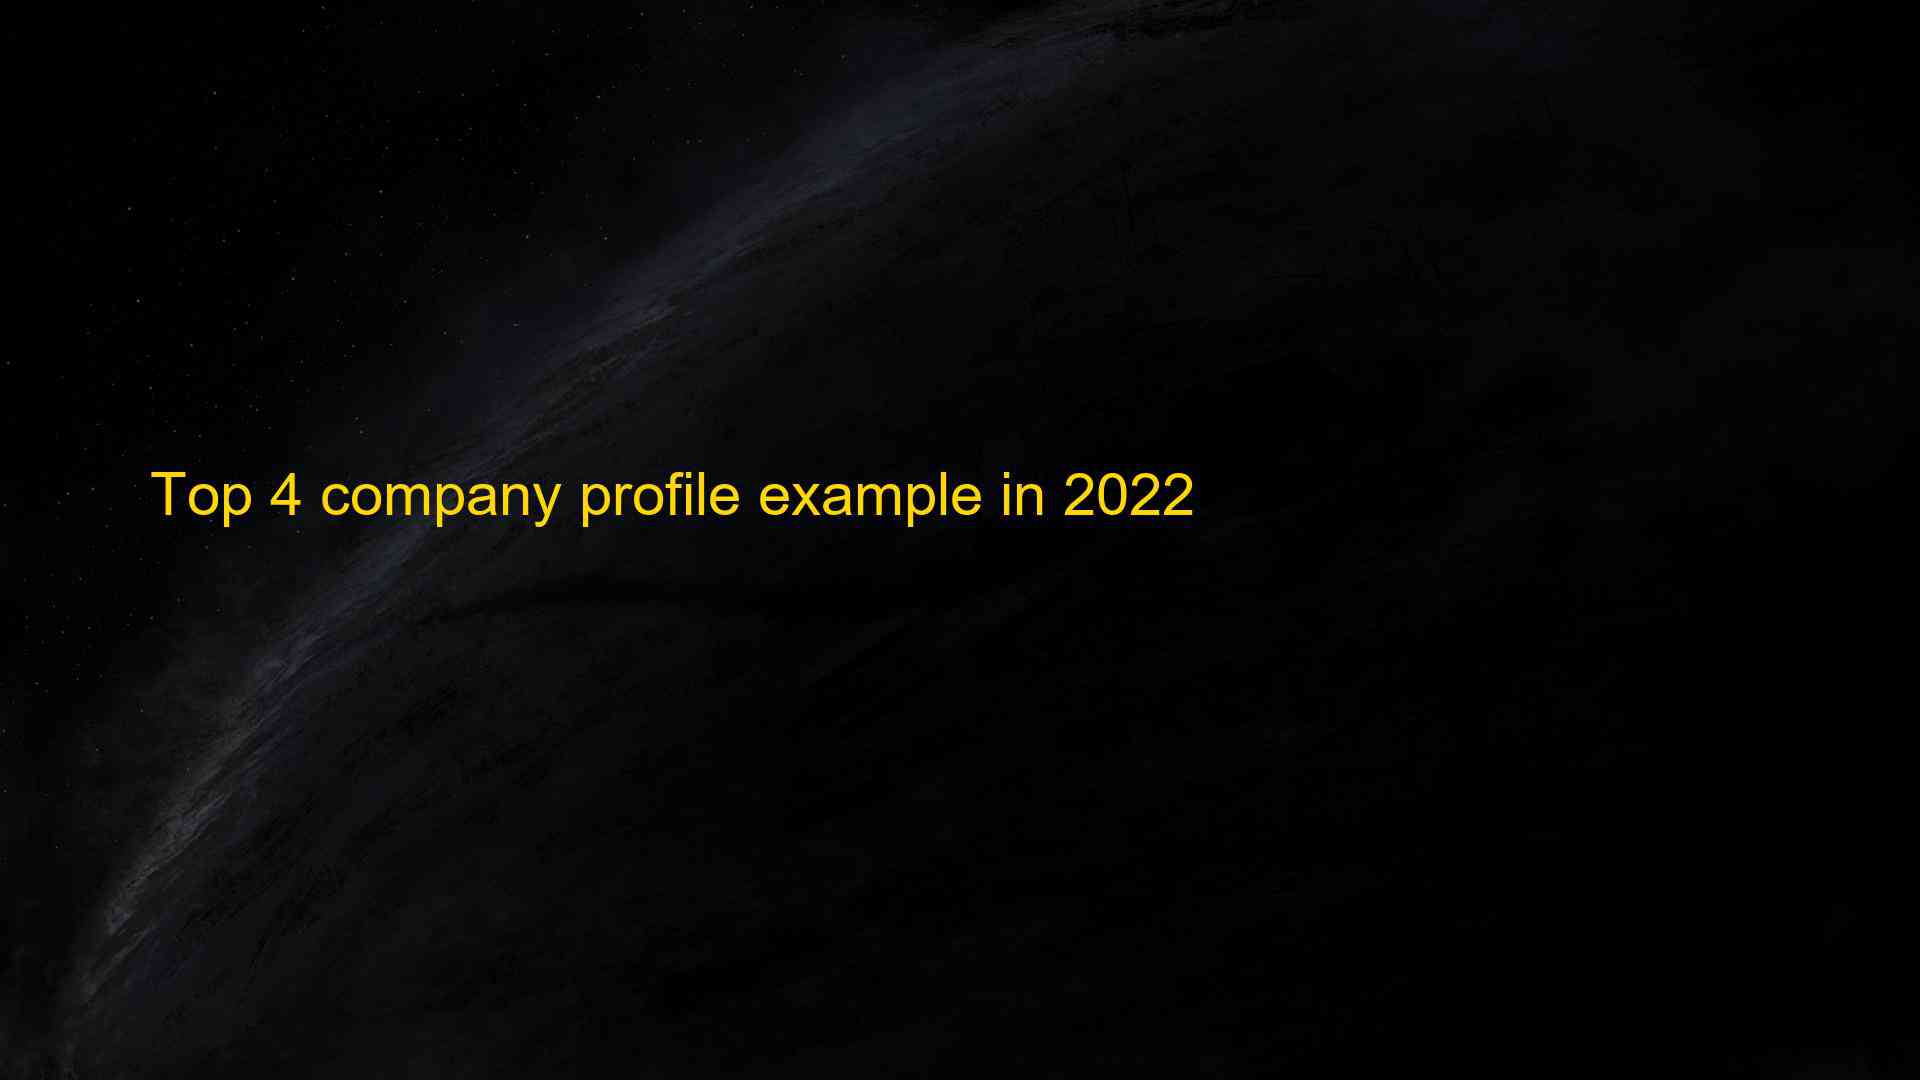 Top 4 company profile example in 2022 1660063099